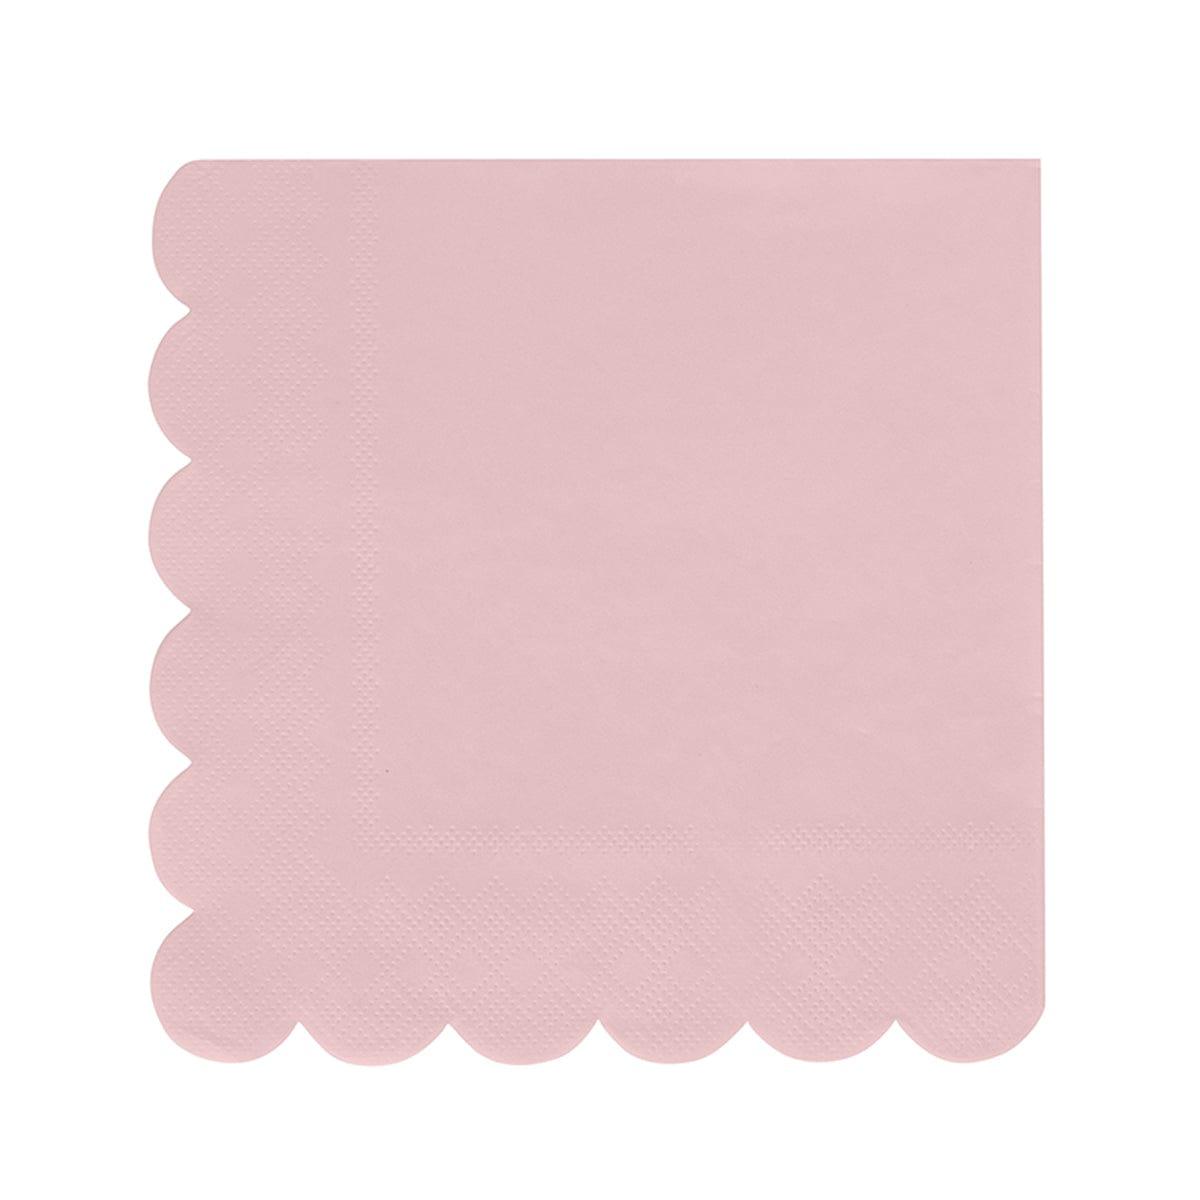 YIWU SANDY PAPER PRODUCTS CO., LTD Everyday Entertaining Flower Edge Light Pink Lunch Napkins, 16 Count